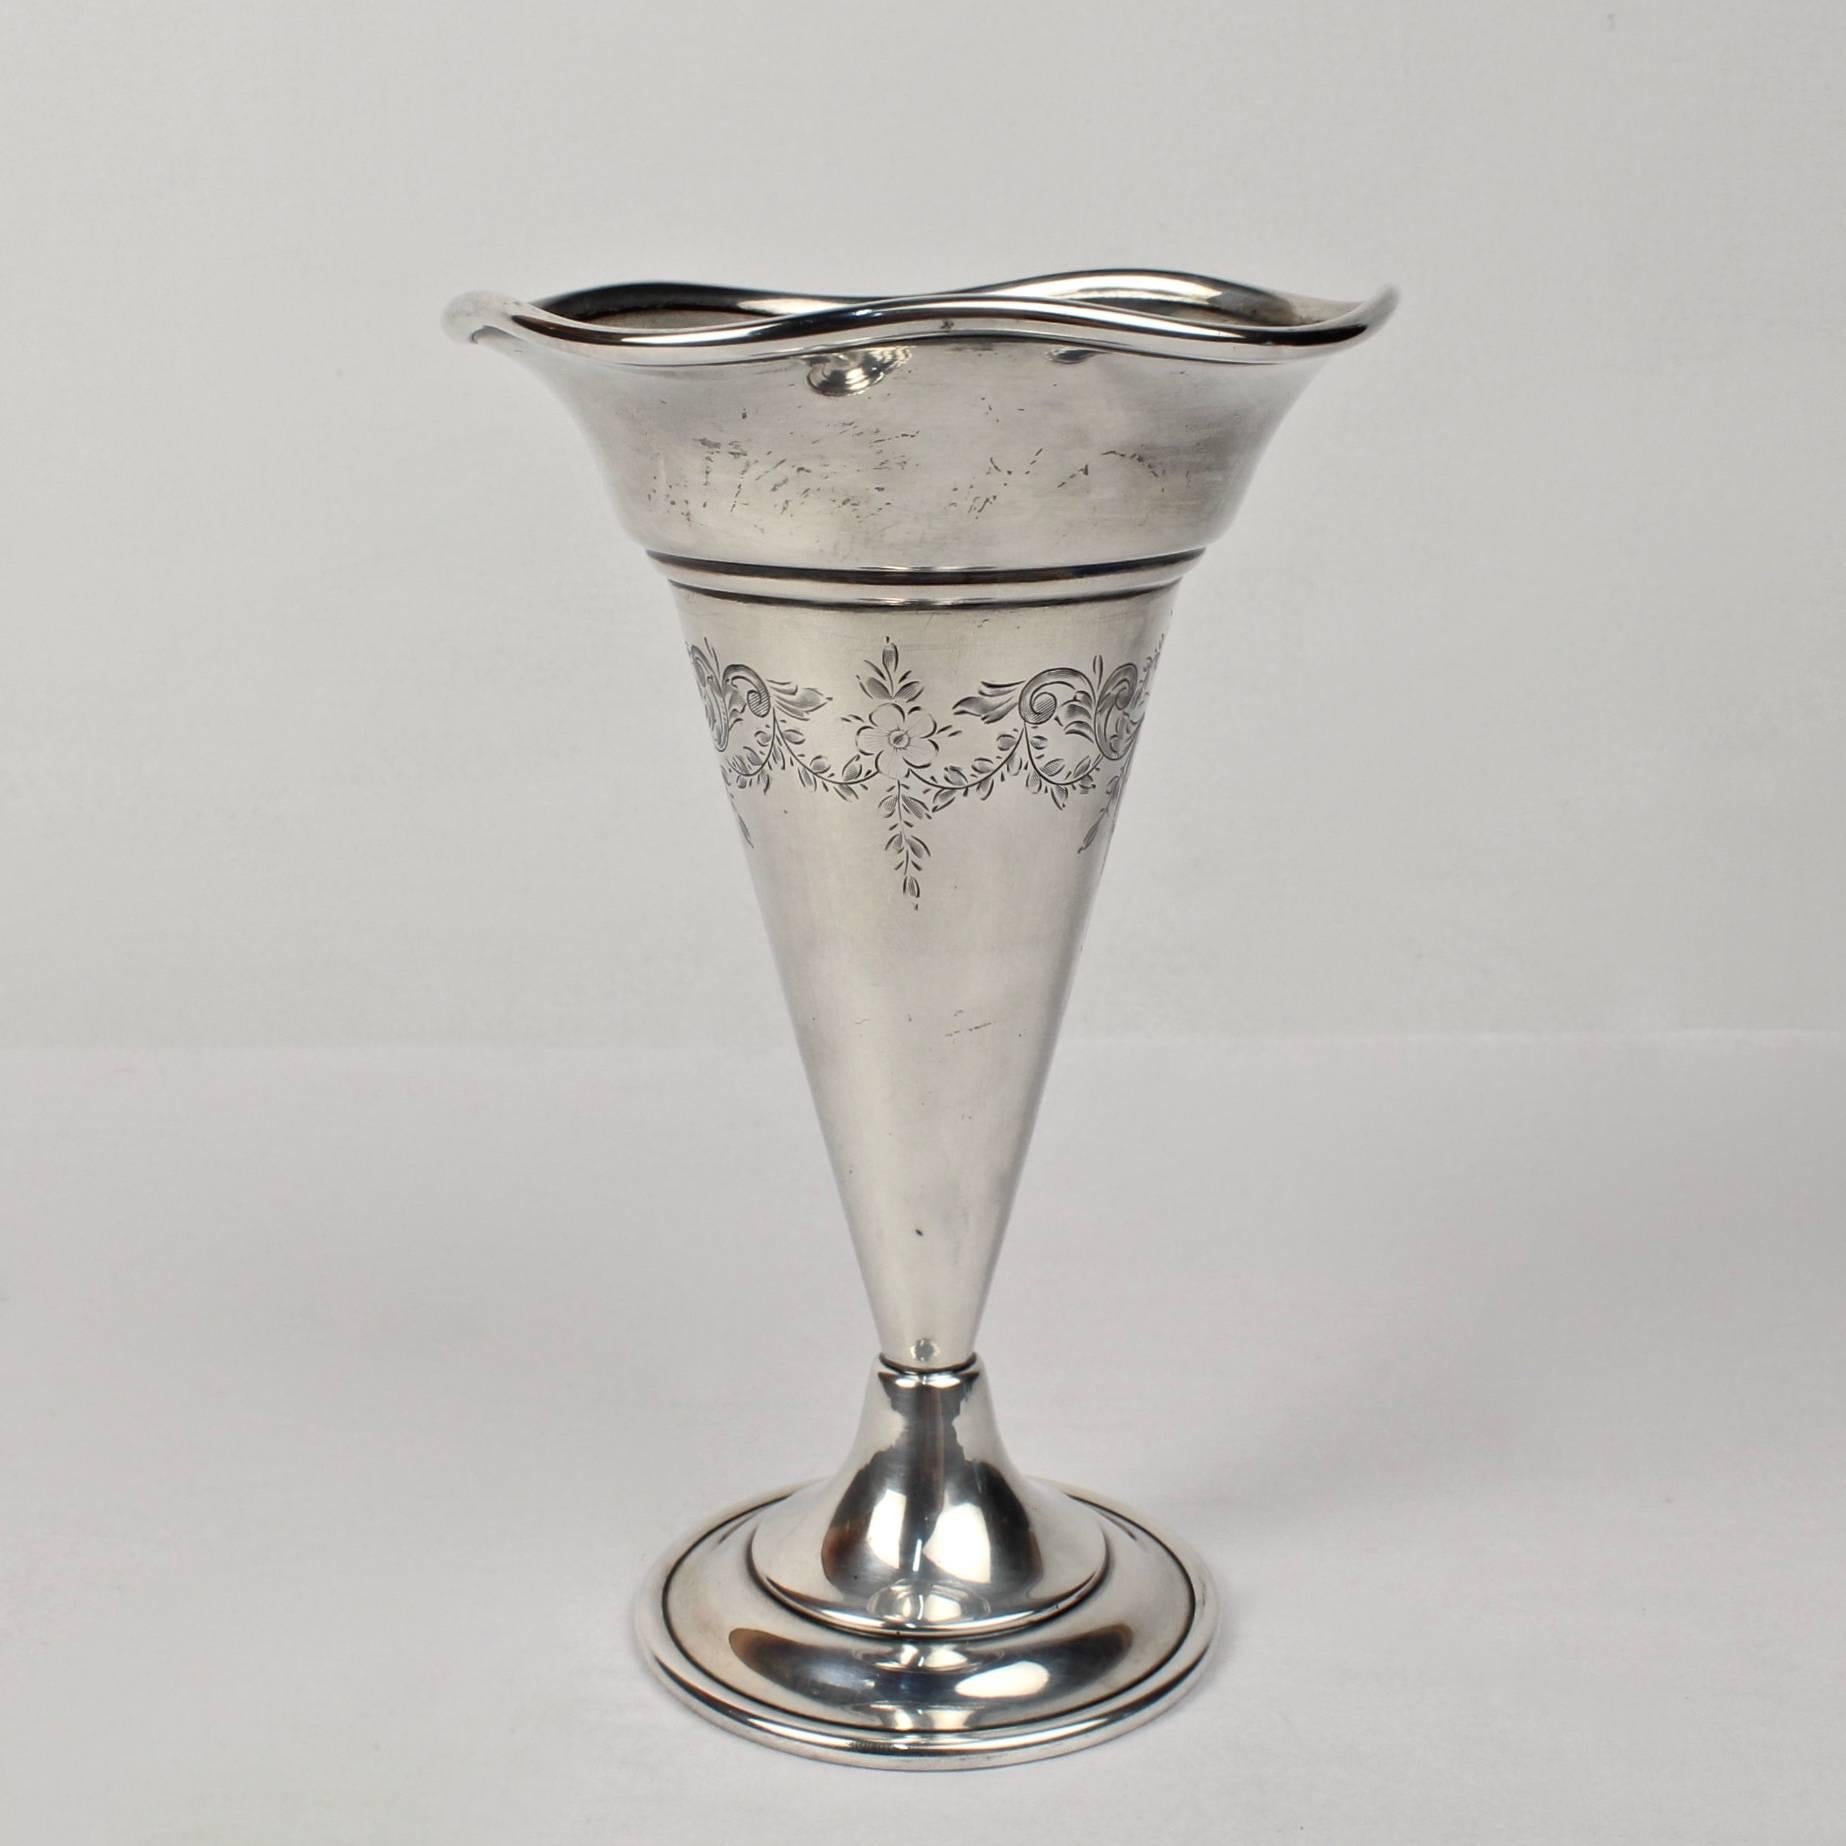 A good antique trumpet form flower vase with flaring, scalloped rim and Fine engraving to the body. 

Produced by George Henckel & Co. (high quality New York Silversmiths) in the early part of the 20th century. 

Height: ca. 7 in.

Items